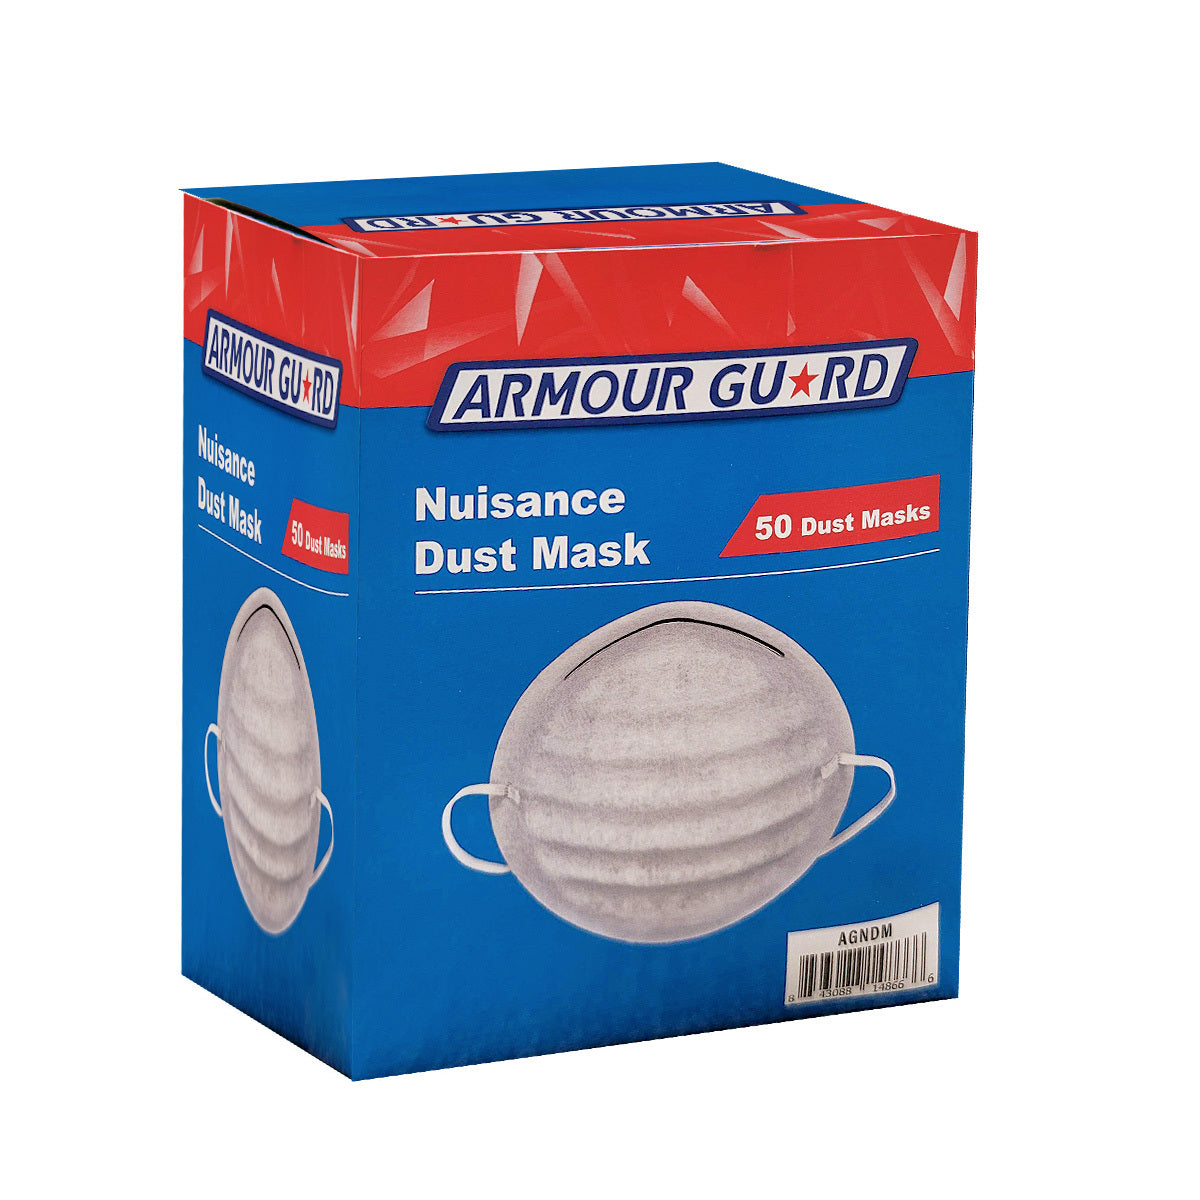 Nuisance Dust Mask - Armour Guard - Box of 50 - Free Shipping